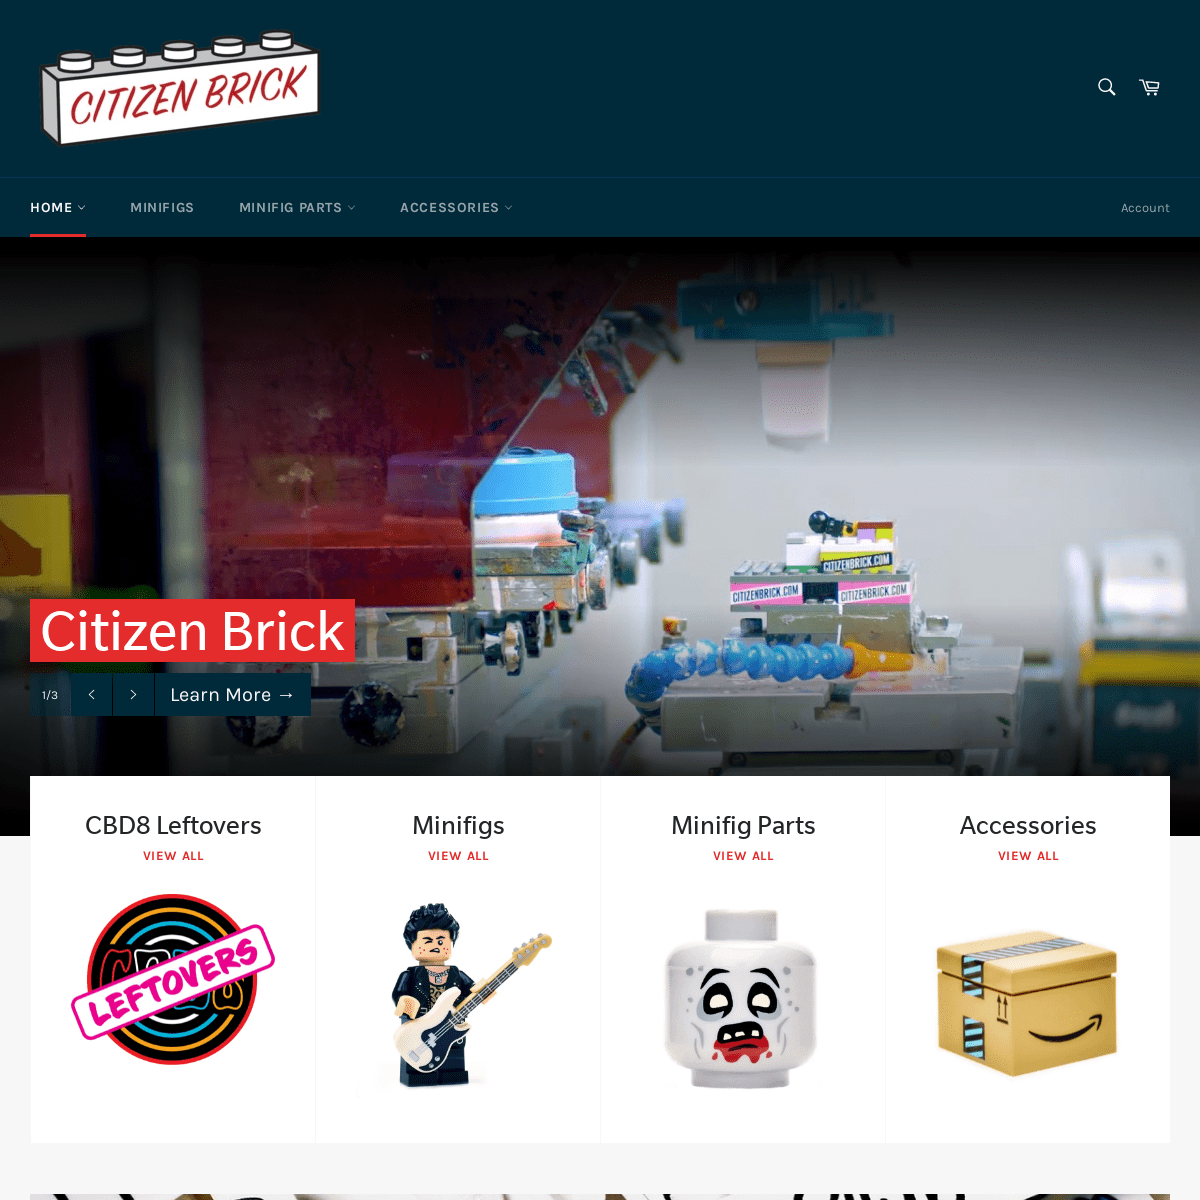 A complete backup of https://citizenbrick.com